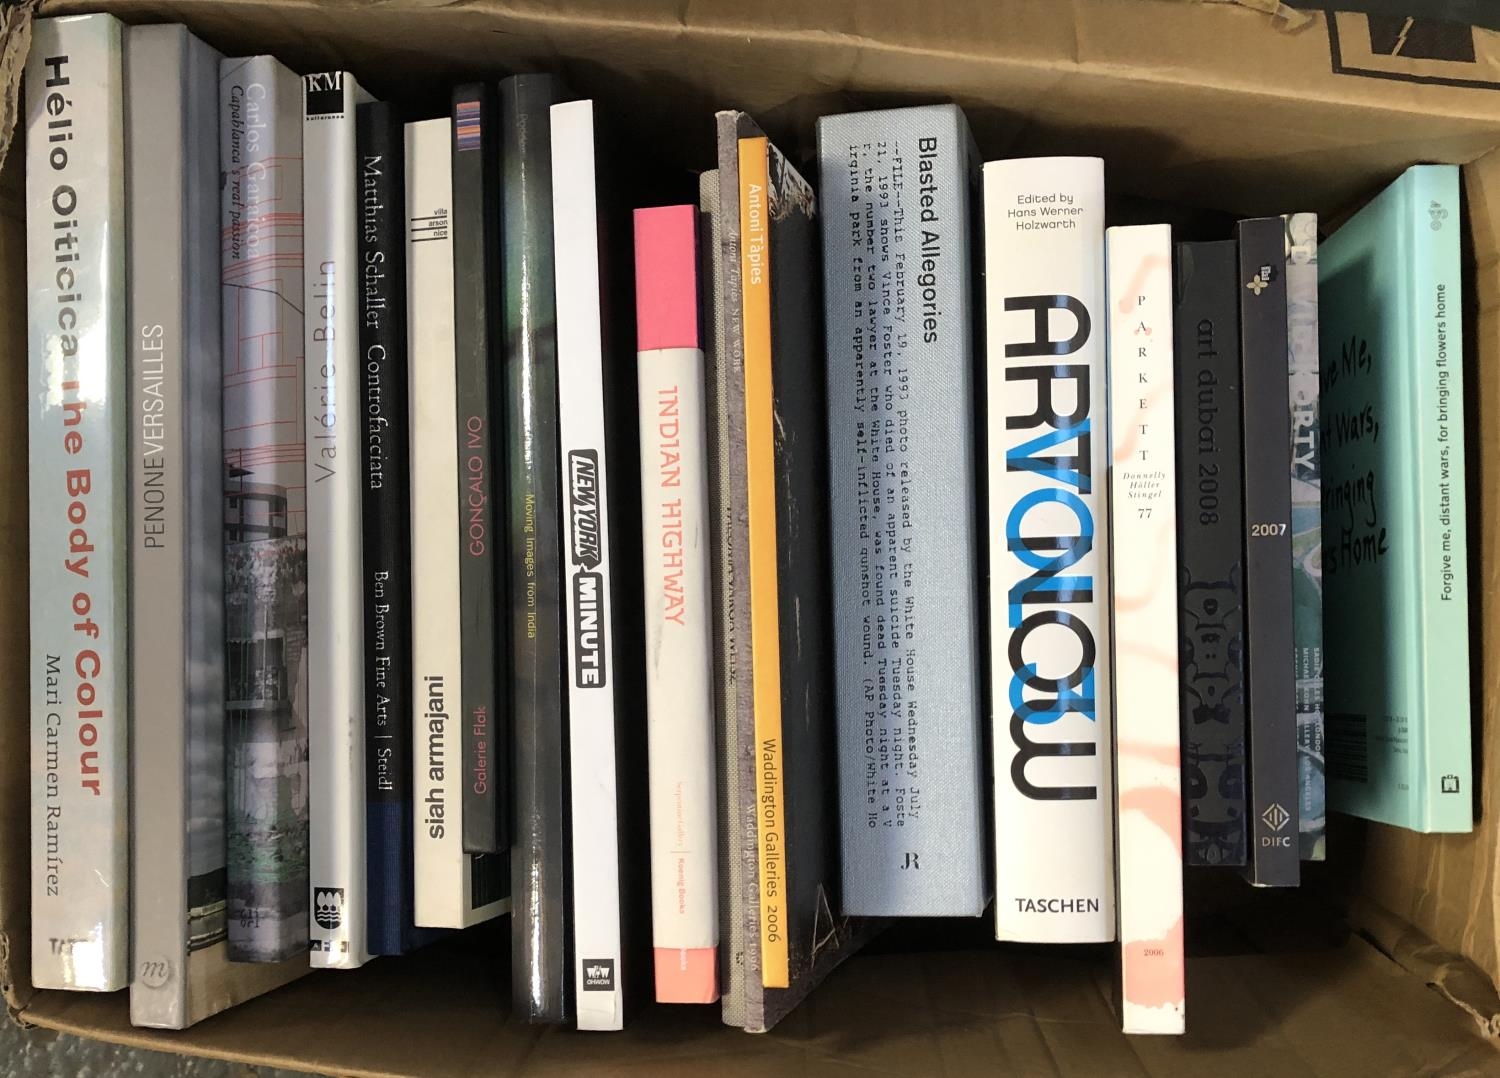 ART CATALOGUES: two boxes of modern, post-modern and contemporary art catalogues including Robyn